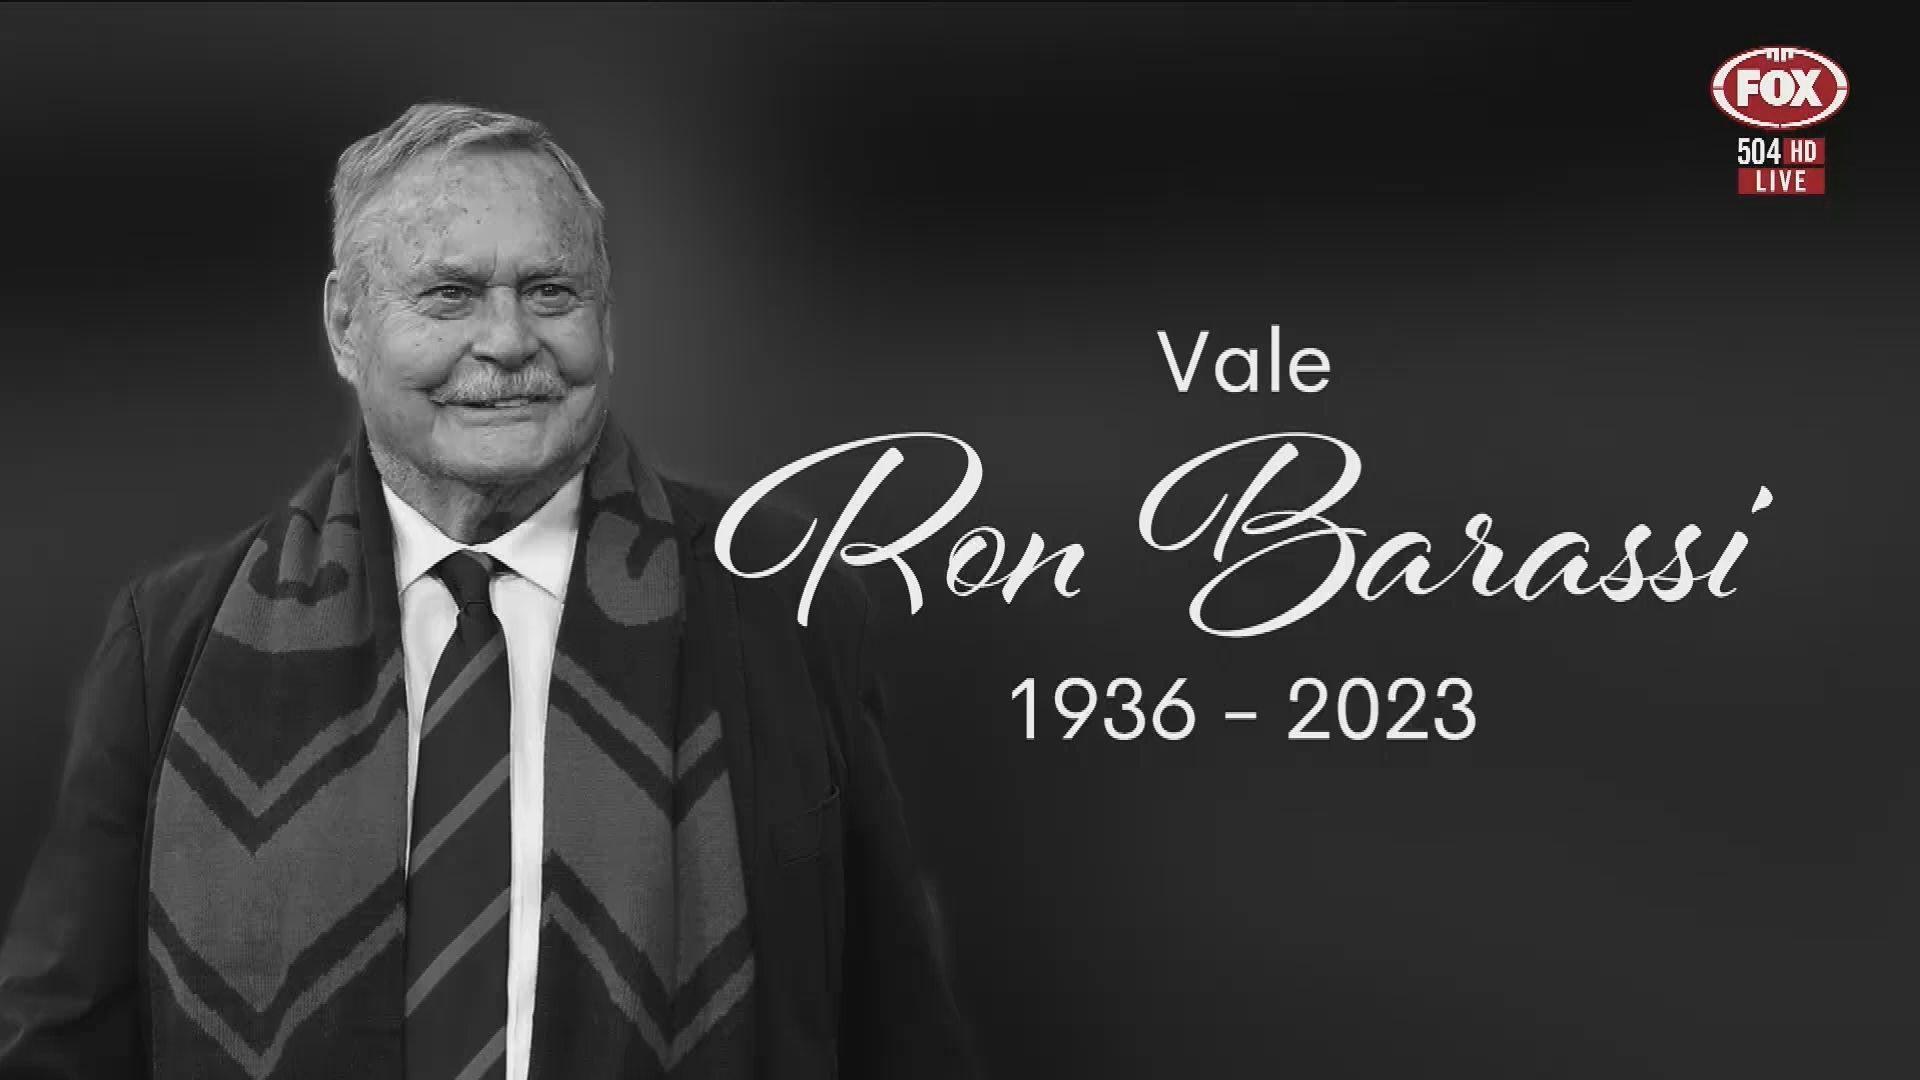 Adelaide Oval falls silent as AFL remembers 'icon' and 'giant' Ron Barassi